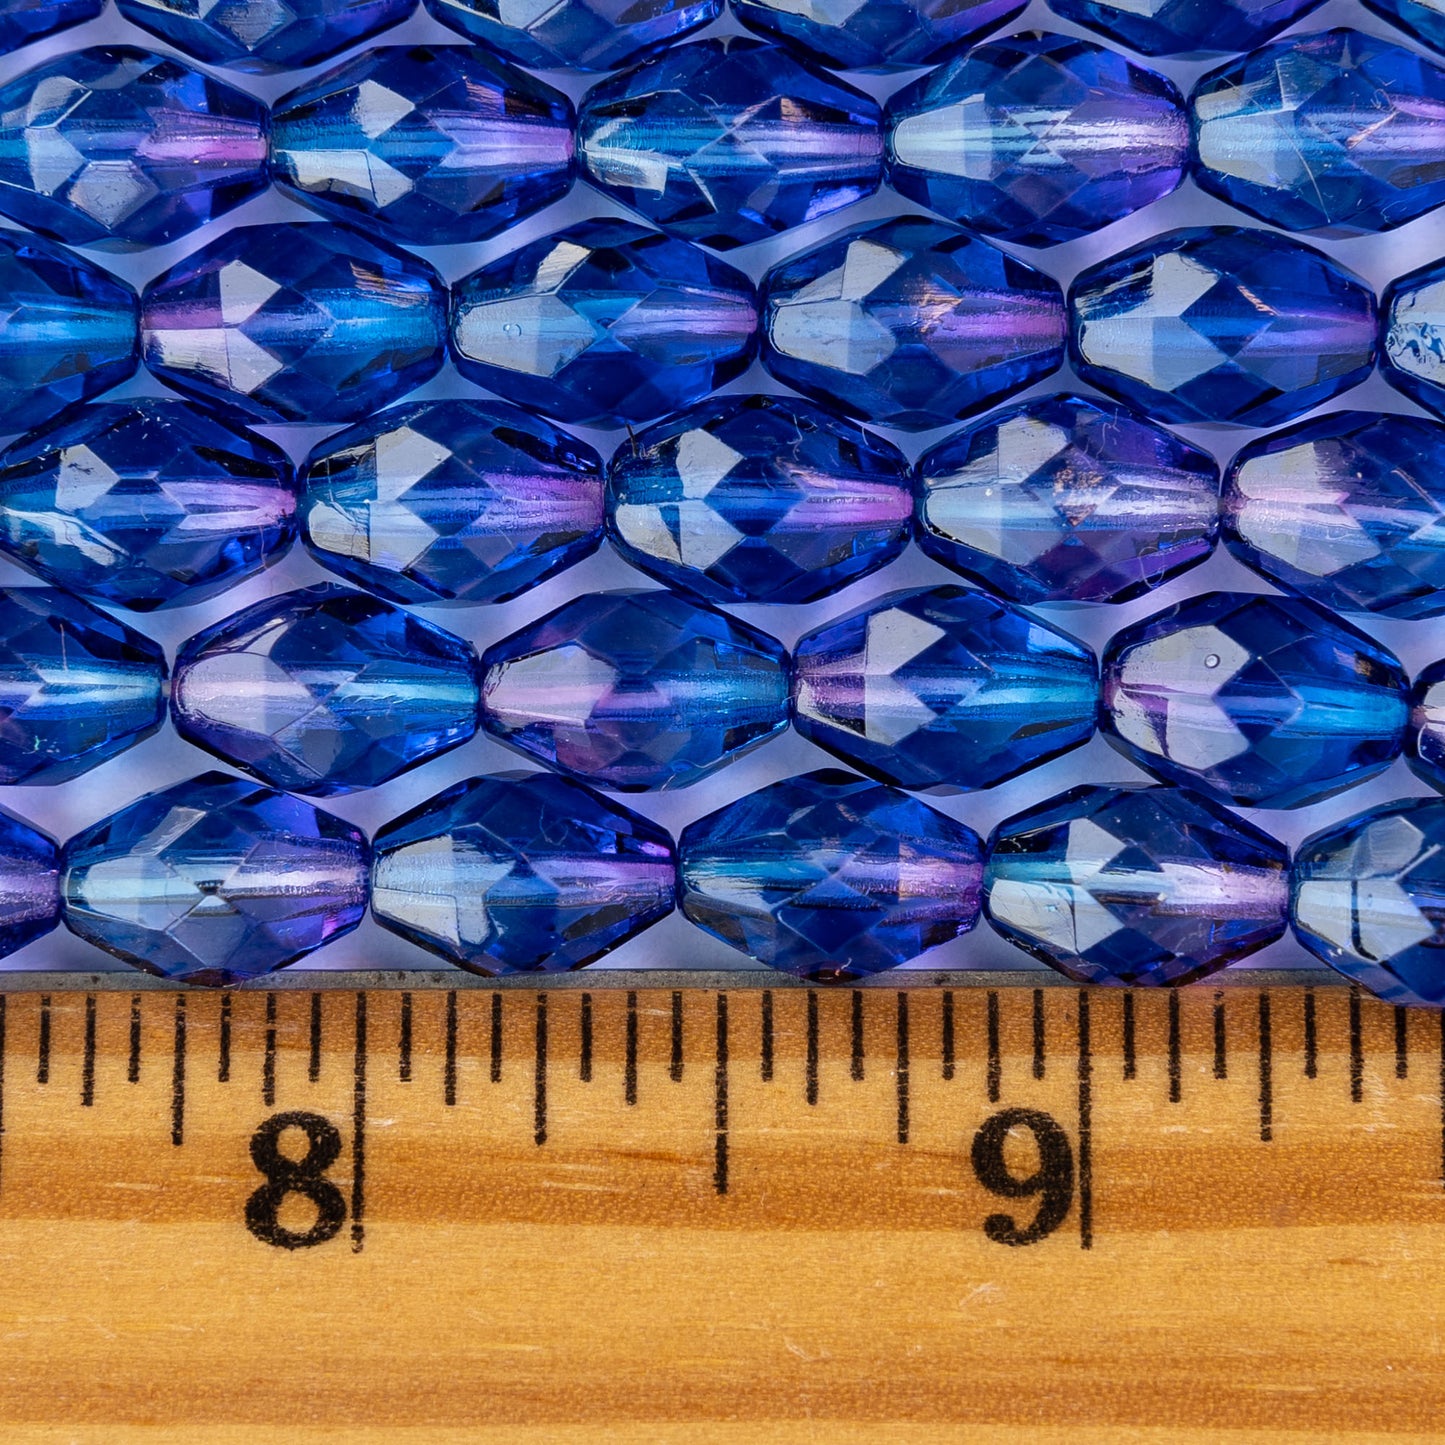 12x8mm Firepolished Glass Oval Beads - Sapphire Violet Mix - 10 Beads